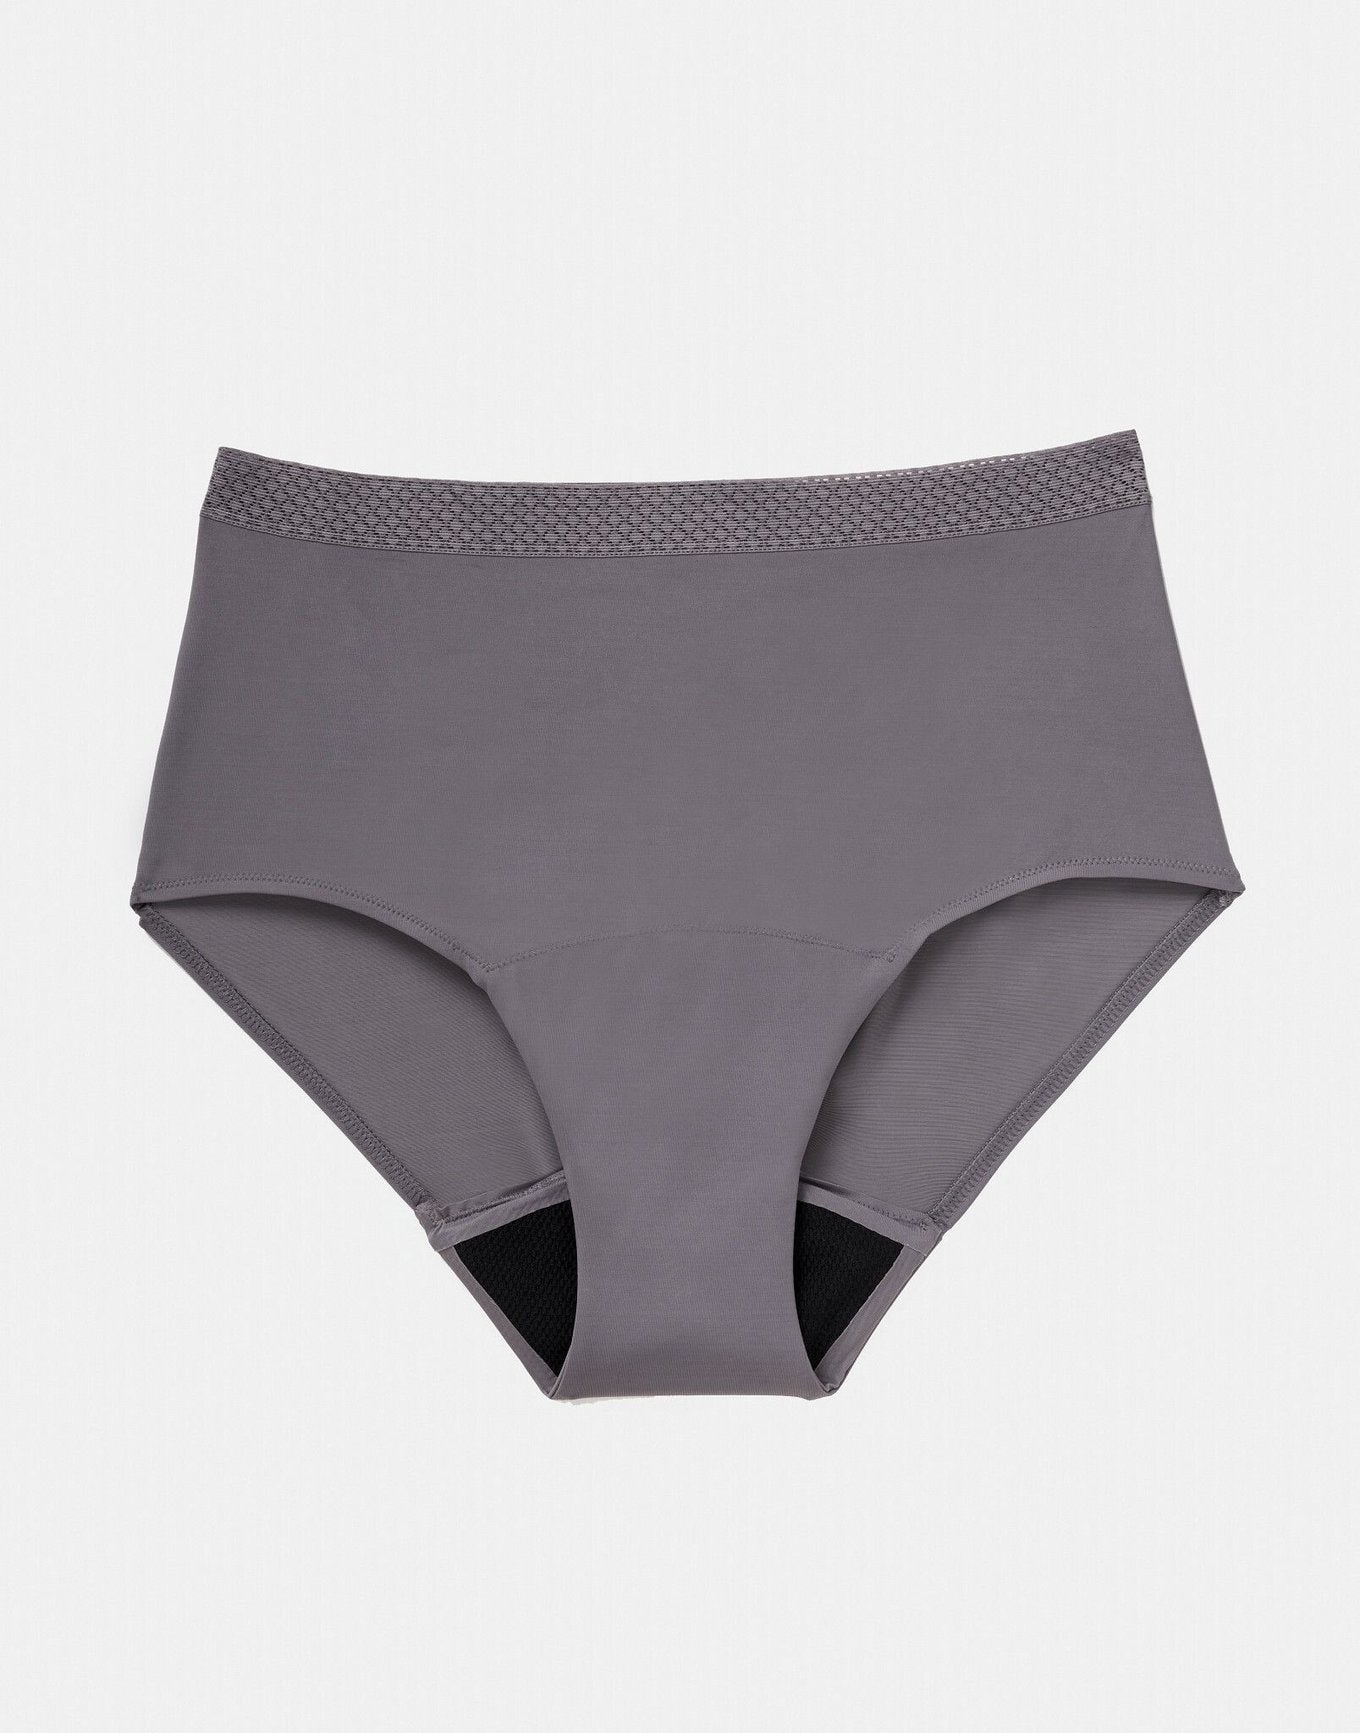 Joyja Jess period-proof panty in color Excalibur and shape high waisted